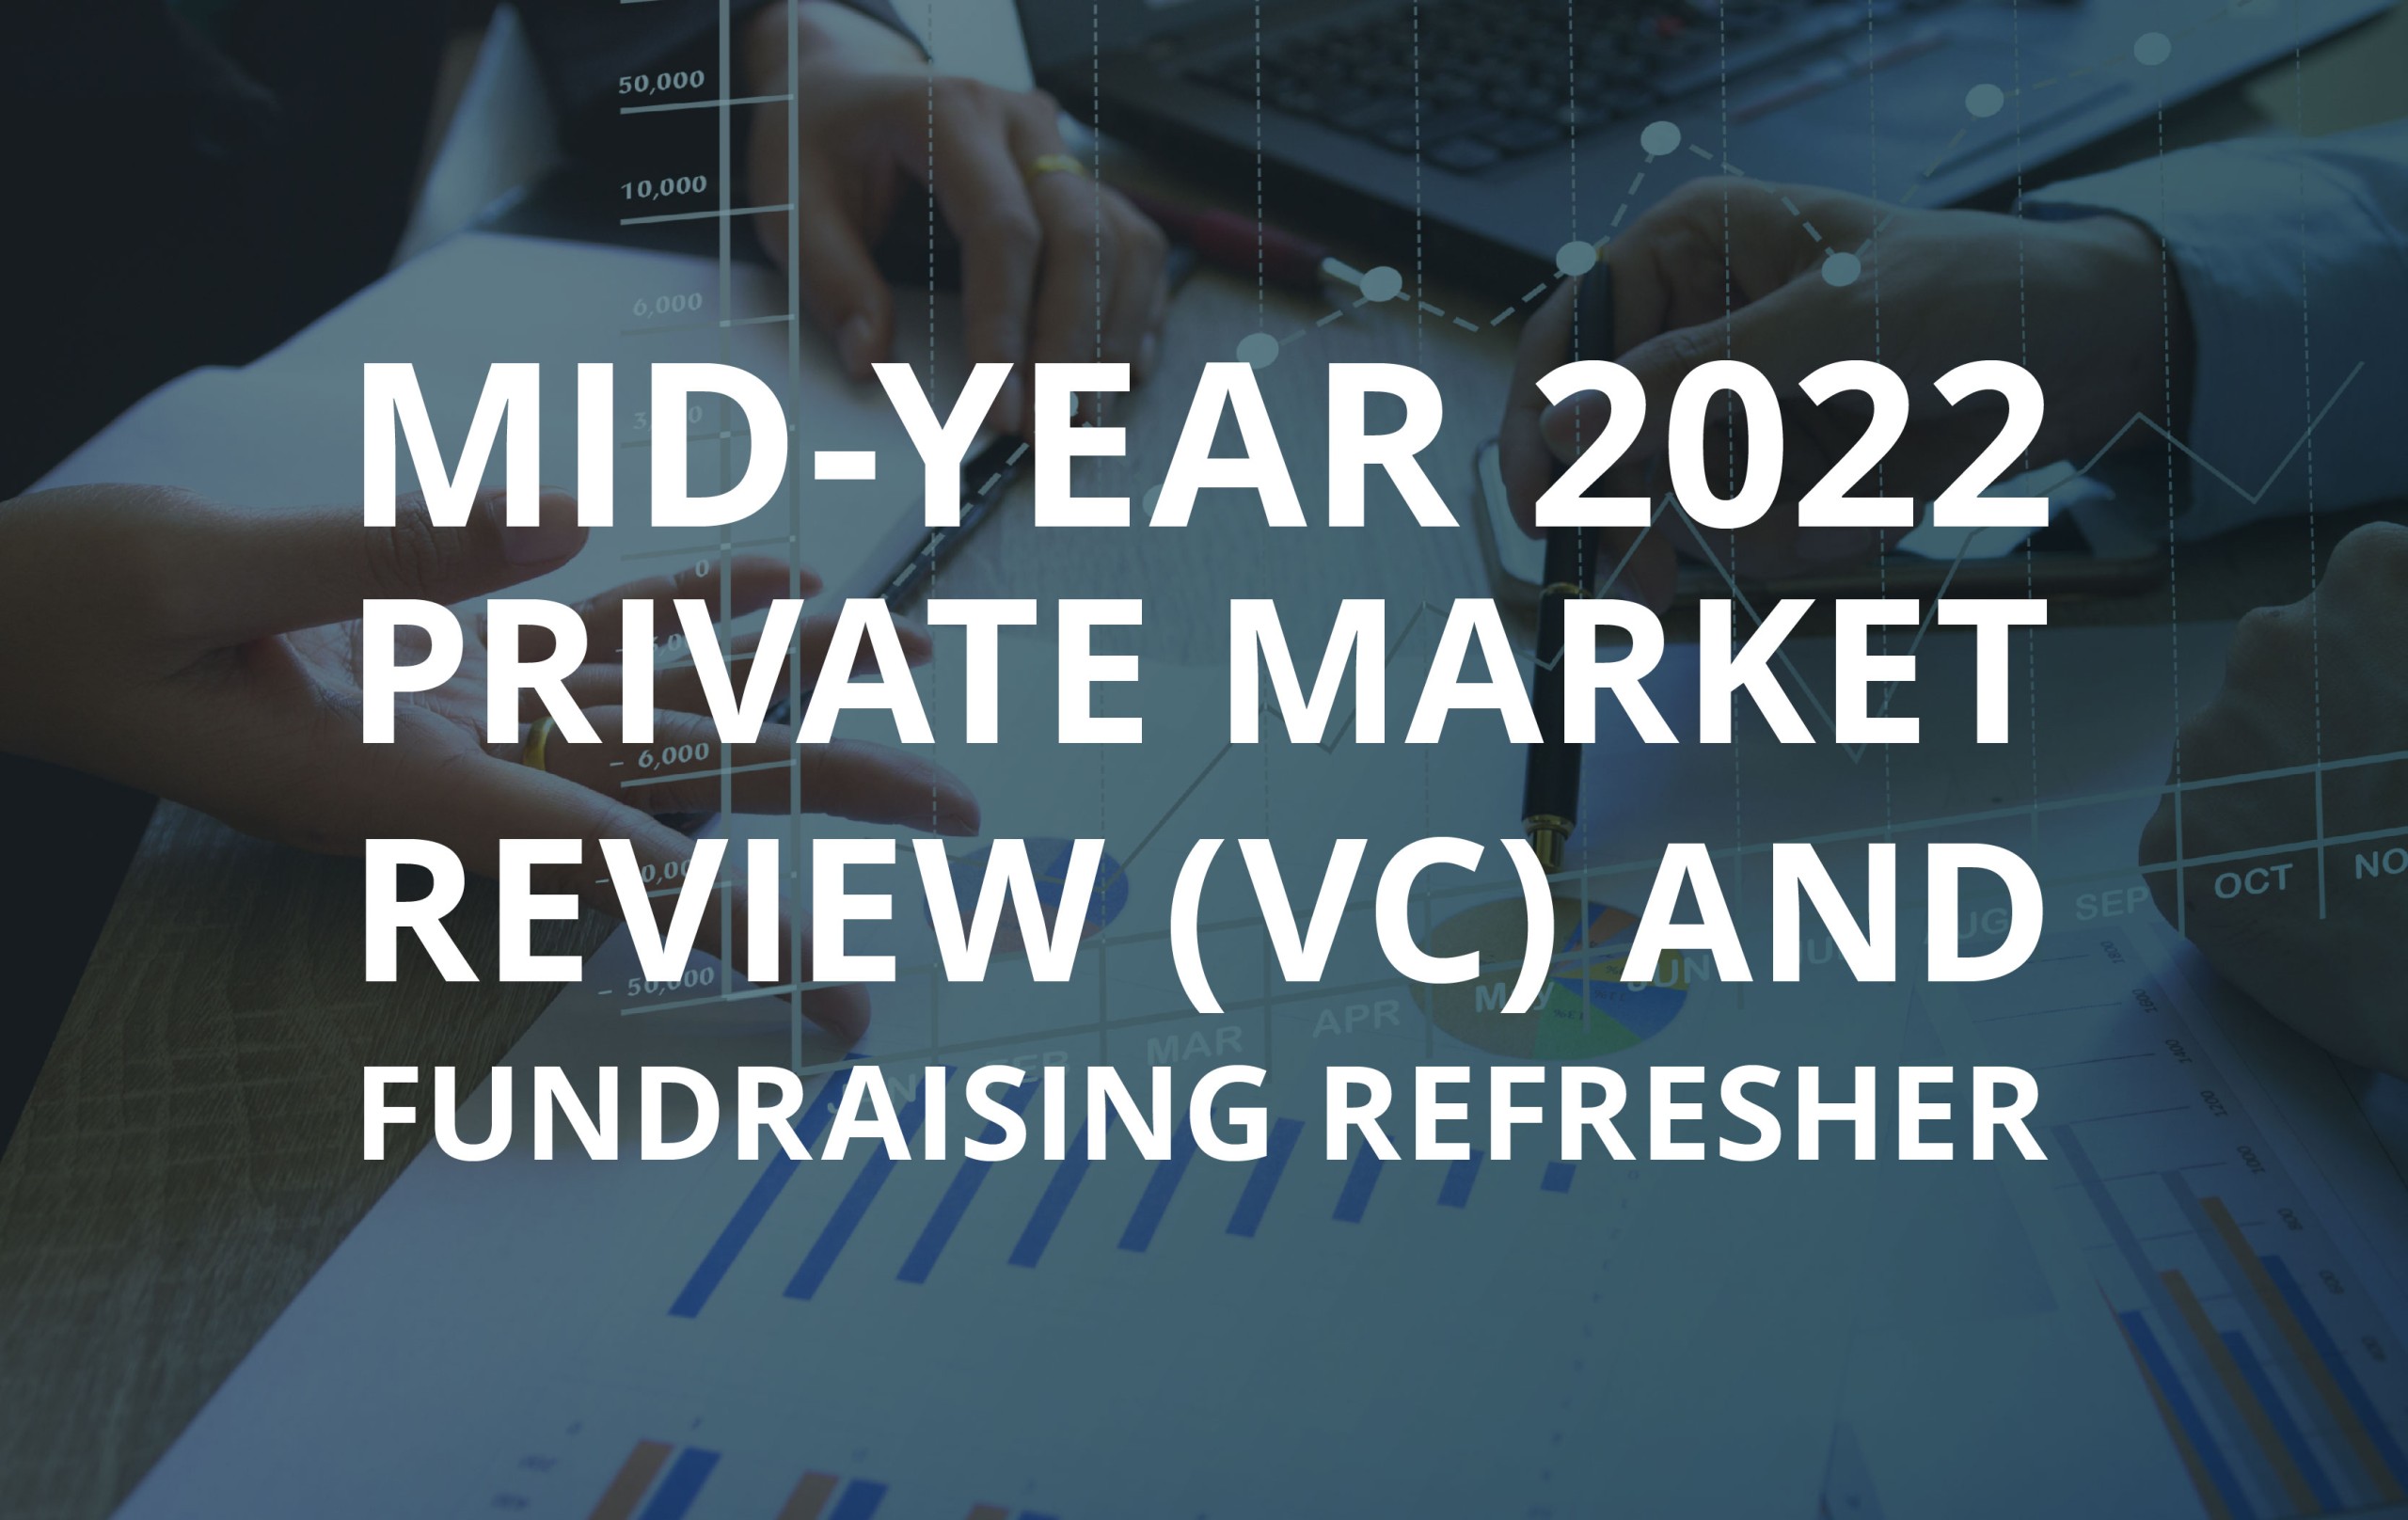 image for Mid-Year 2022 Private Market Review (VC) and Fundraising Refresher